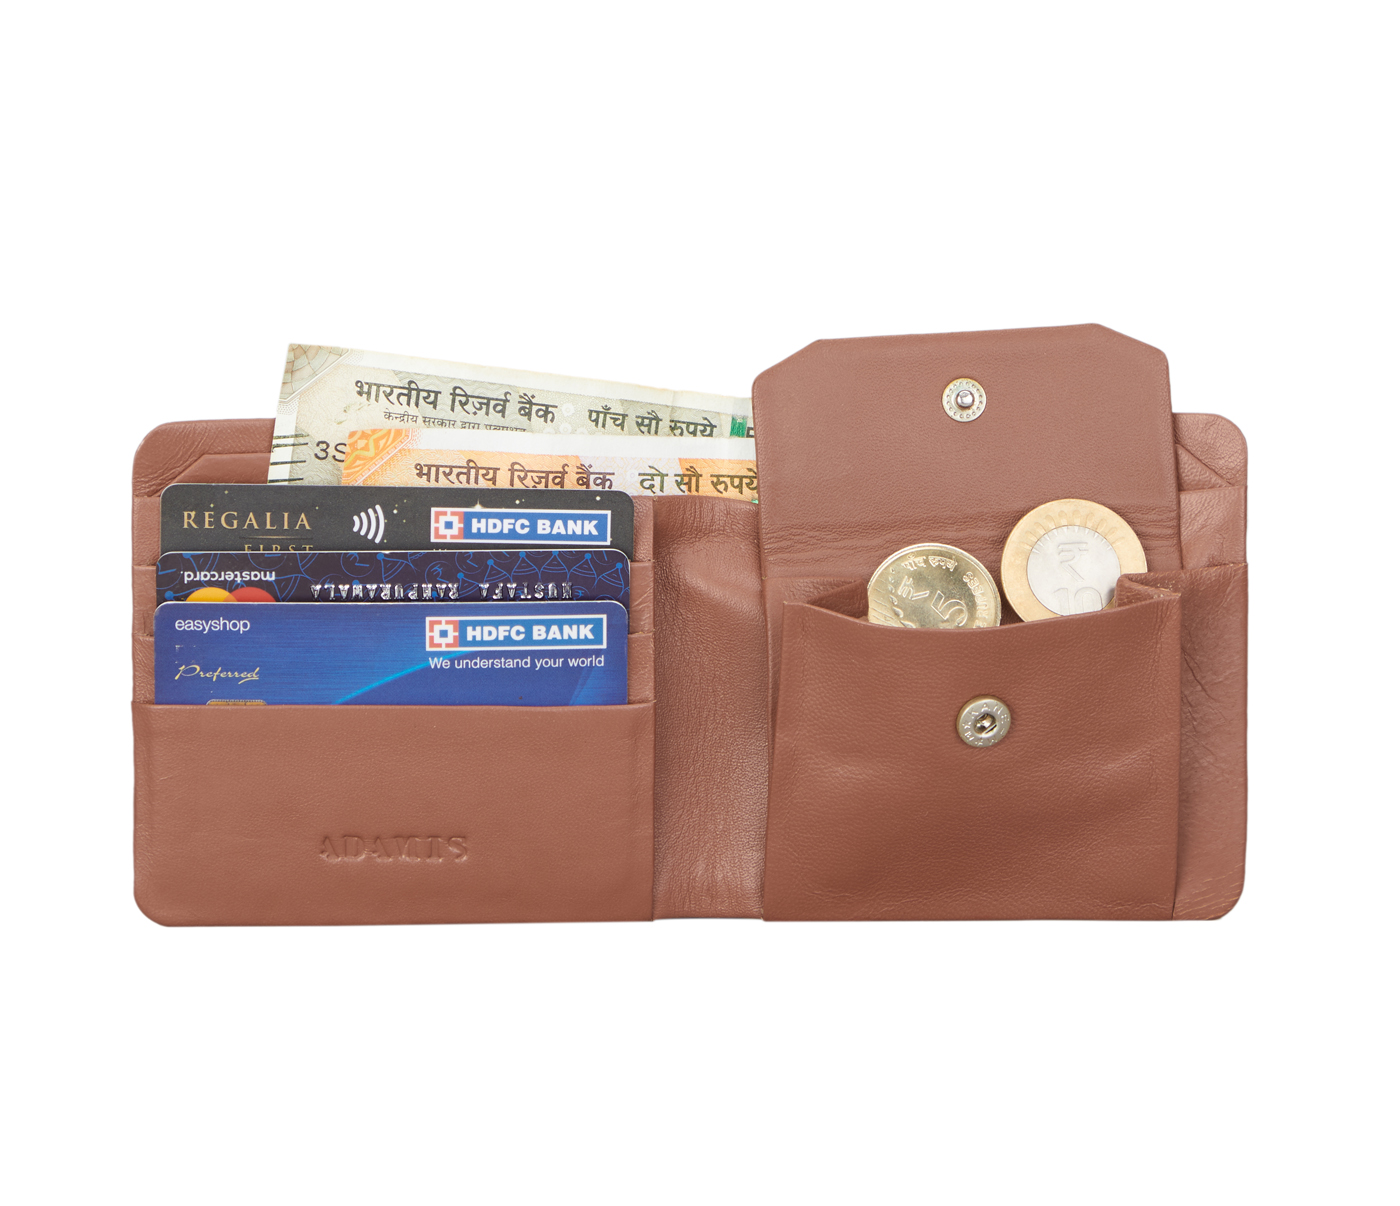 VW1-Ashton-Men's bifold wallet with coin pocket in Genuine Leather - Tan